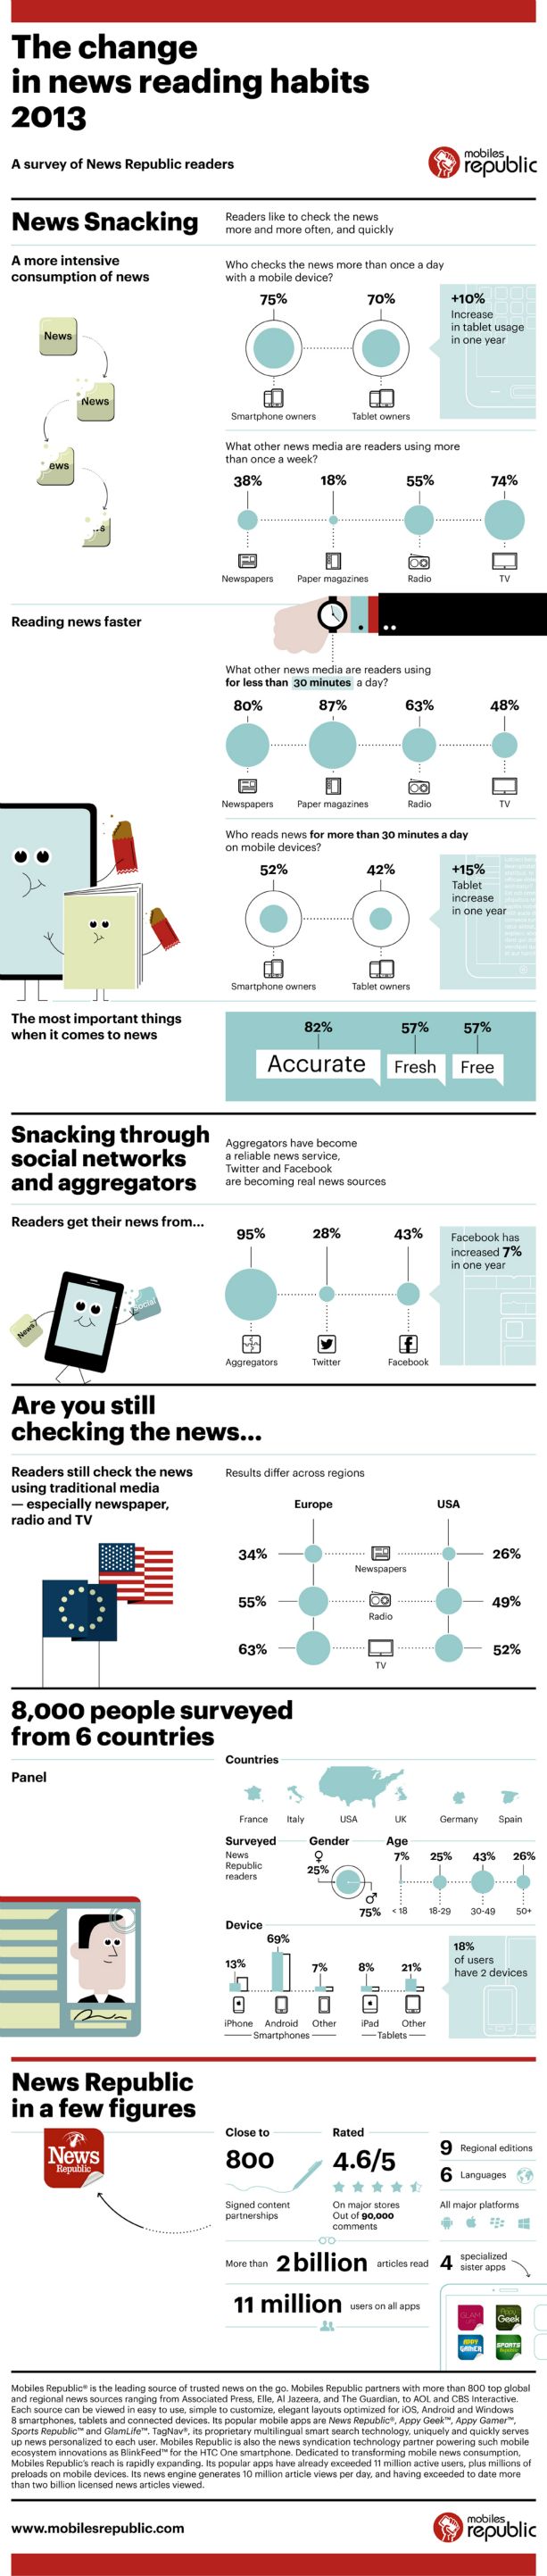 BLOG_News_snacking_Infographic2013